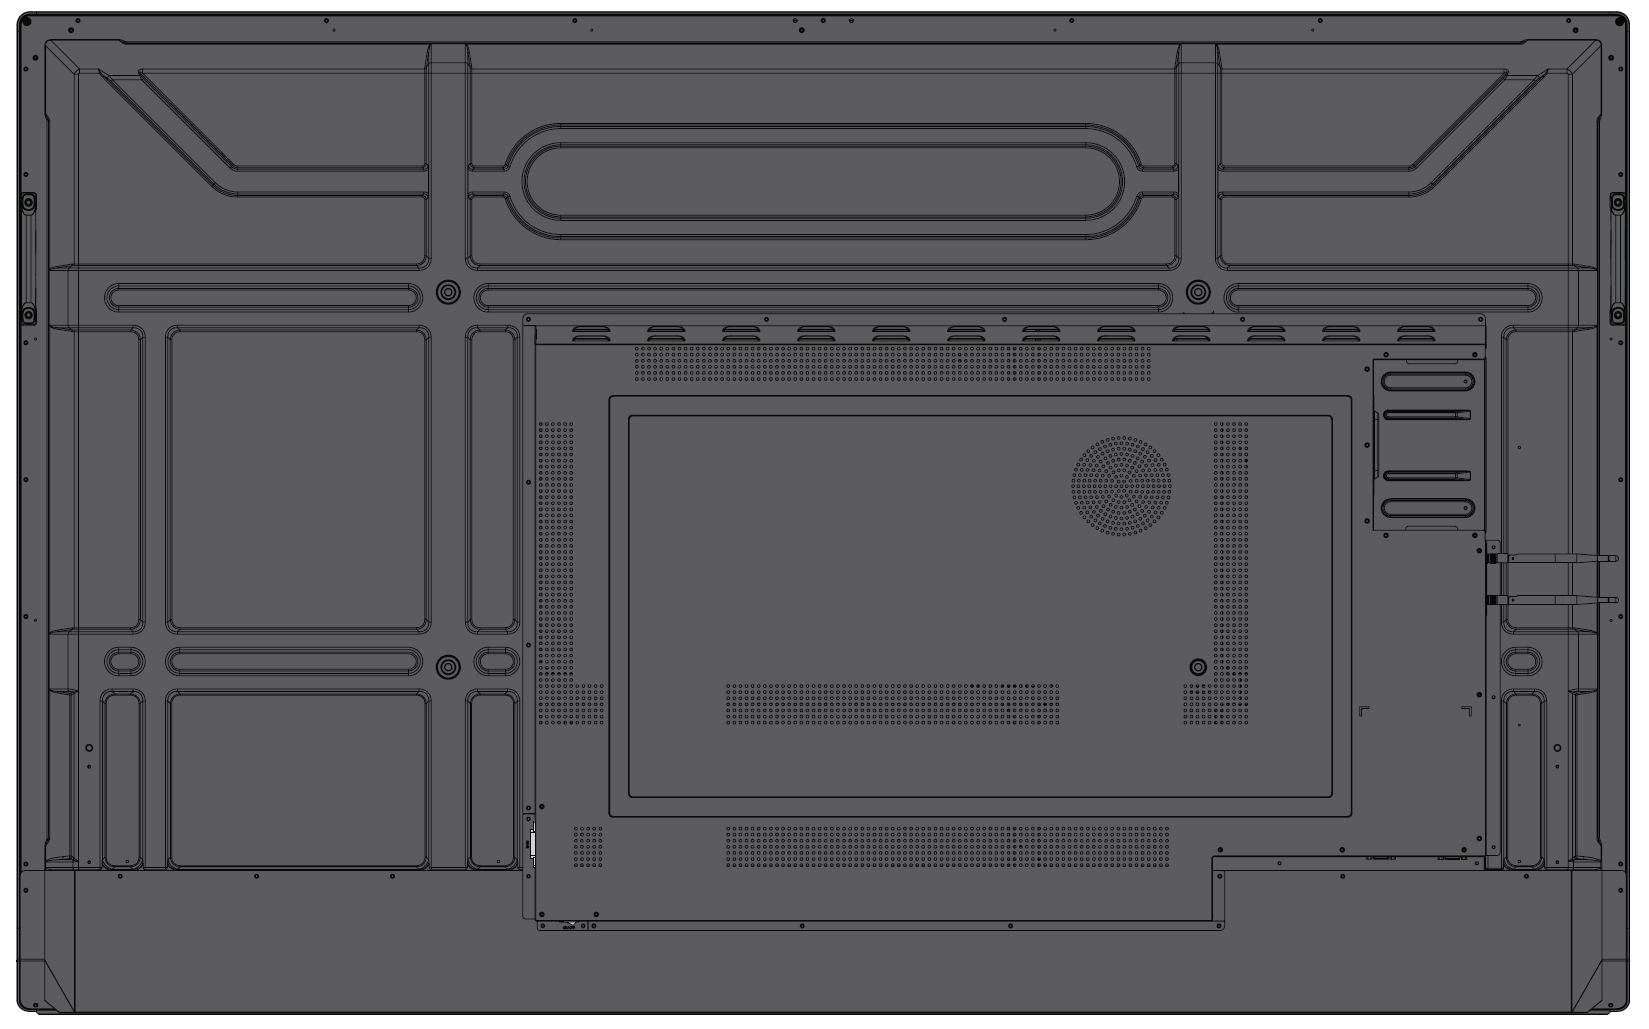 IFP52 Rear Overview.png